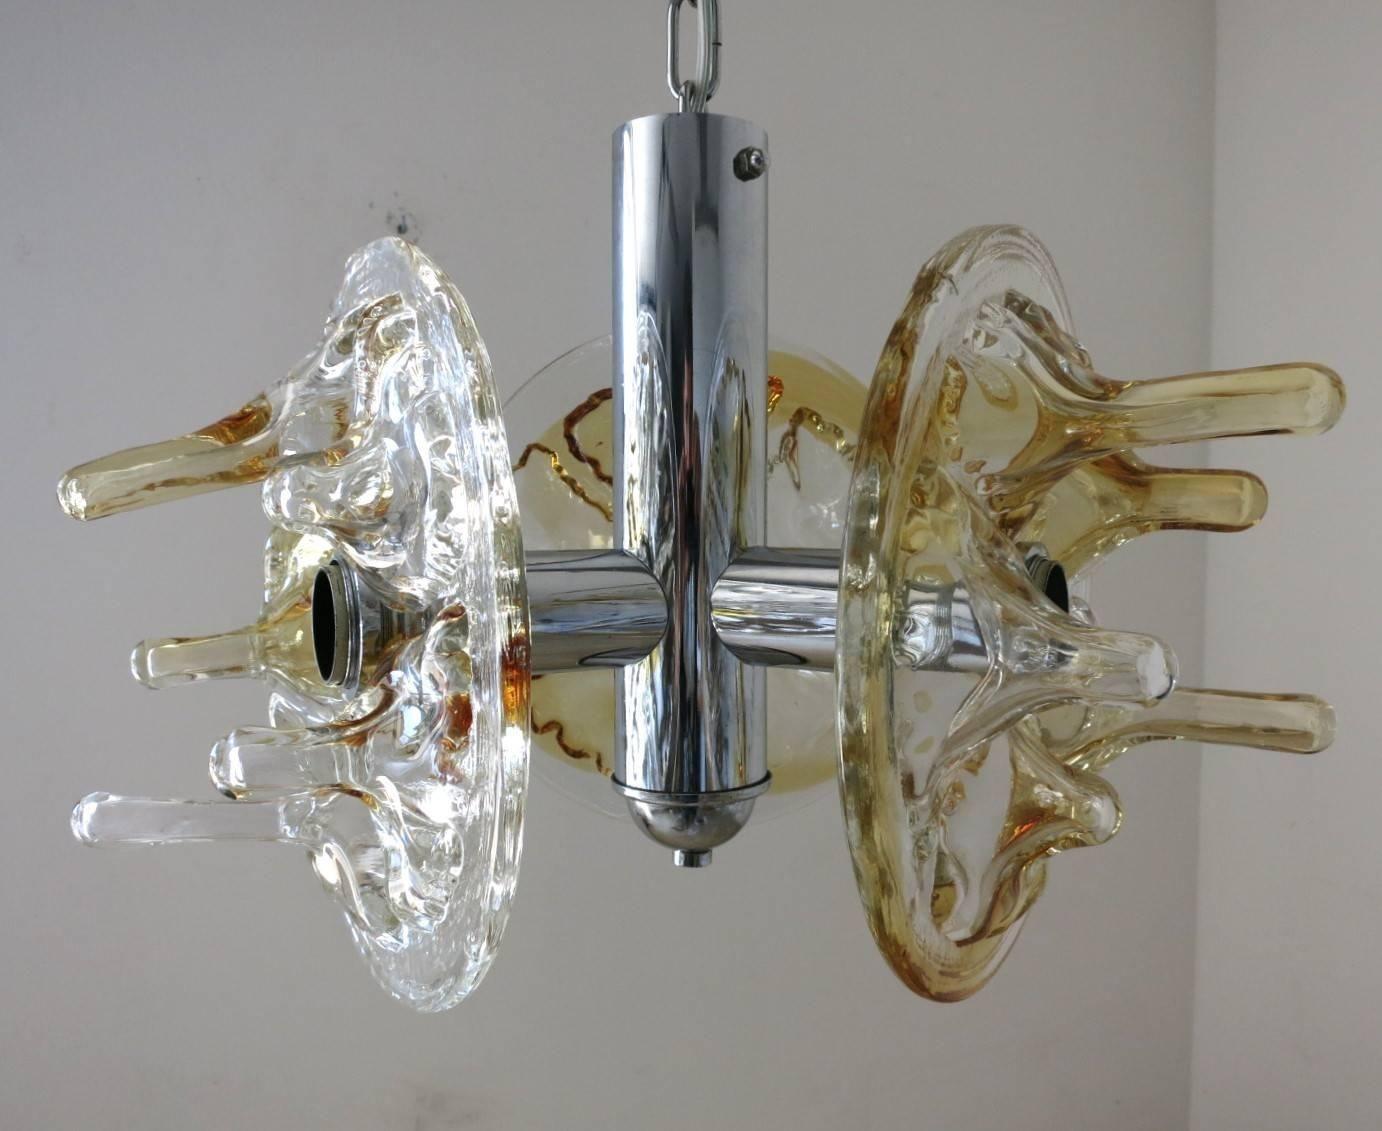 This abstract vintage Italian pendant made in the 1960's by Mazzega features a blend of clear and amber handblown Murano glass with a unique abstract shape. The Murano glass disks are carefully mounted on a chrome frame. The light fixture is rewired